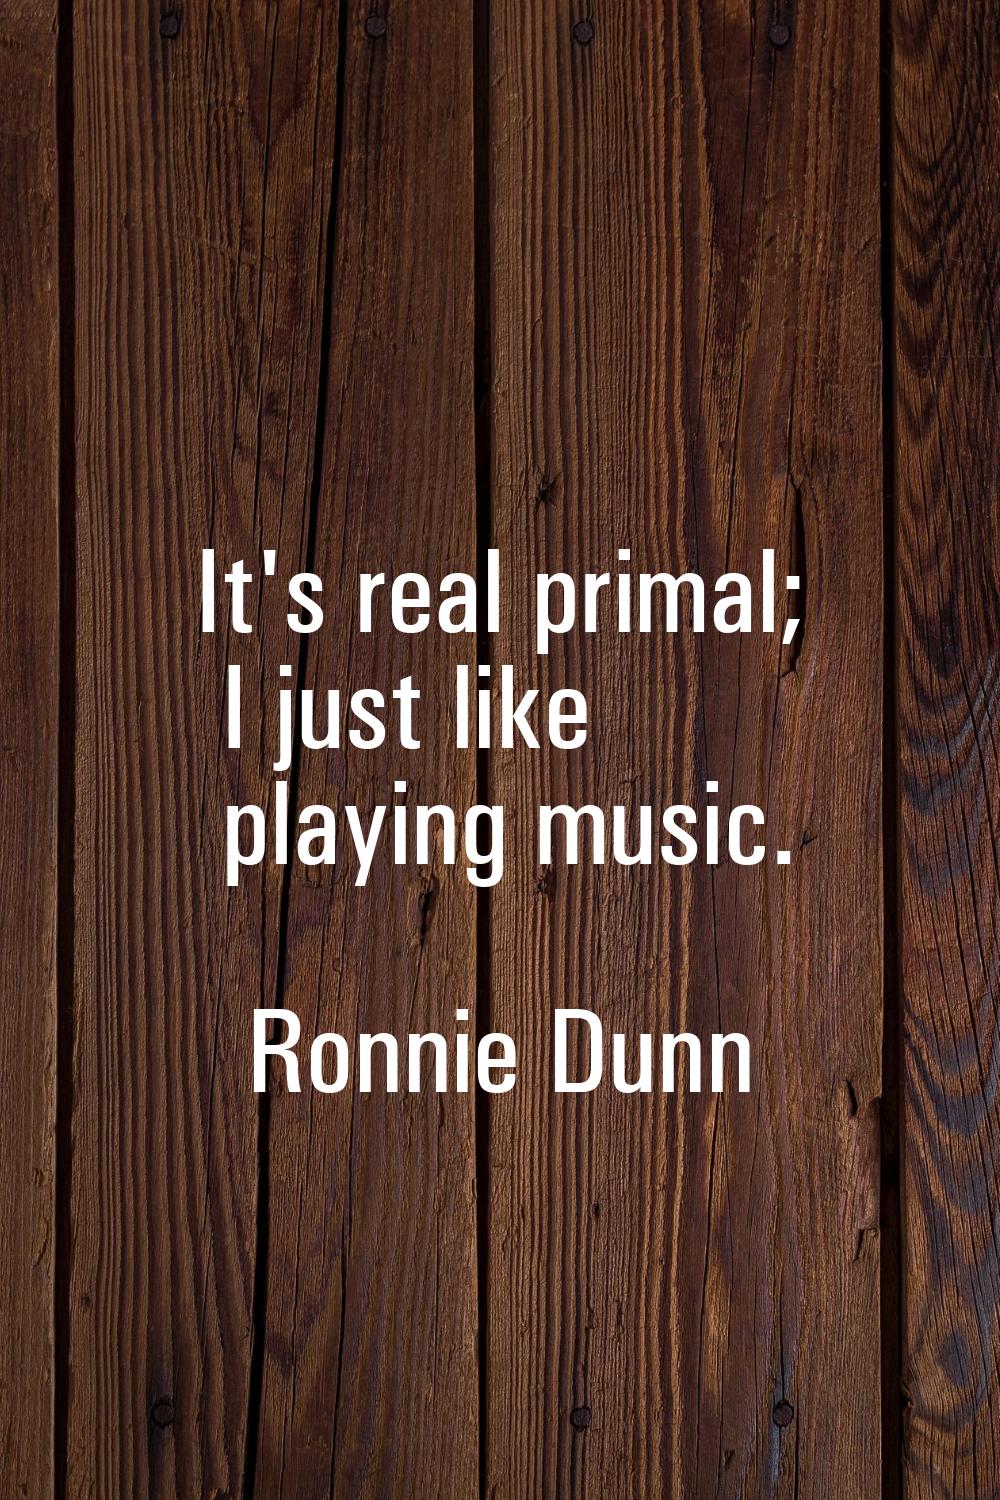 It's real primal; I just like playing music.